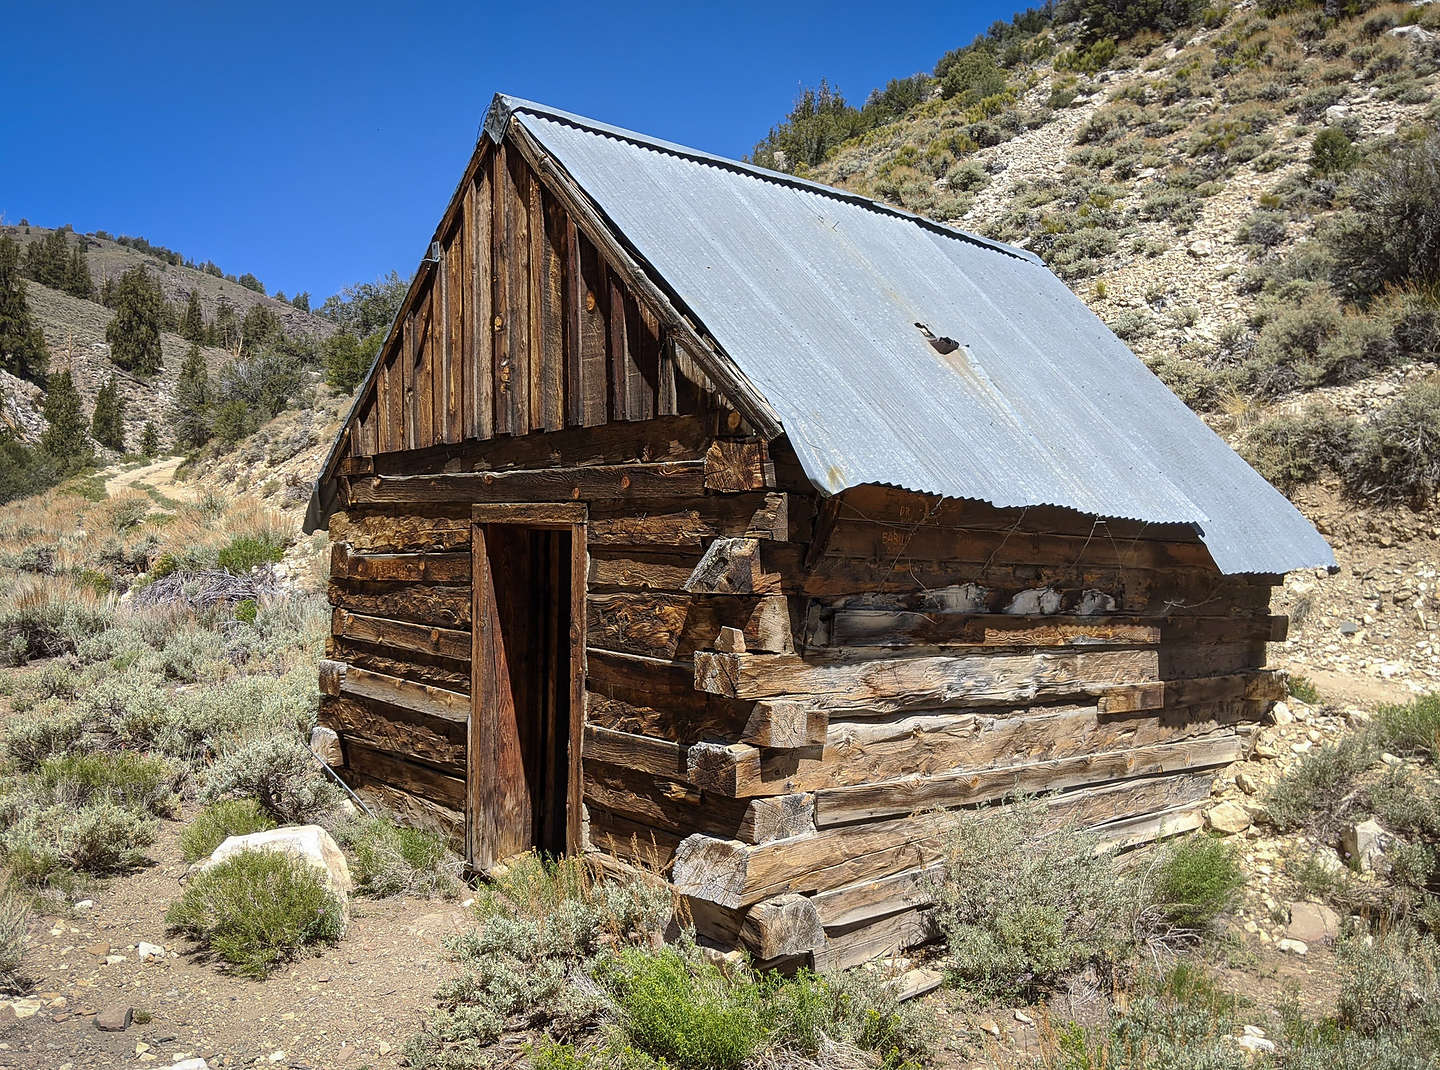 Old Miner's cabin made of railroad ties along the Wyman Creek Road